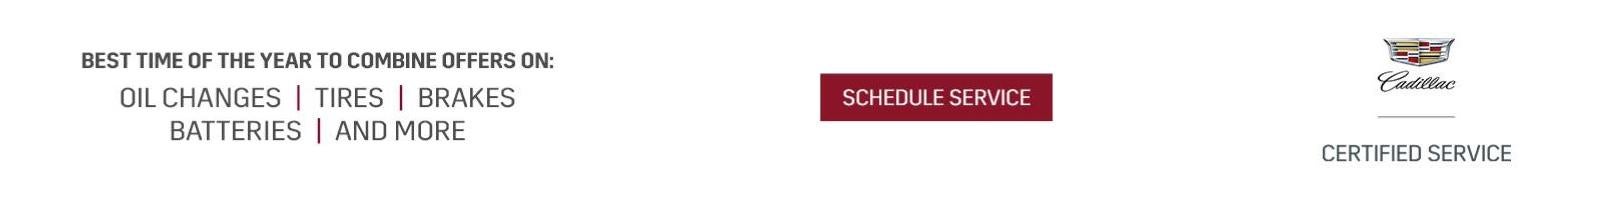 banner image for schedule service